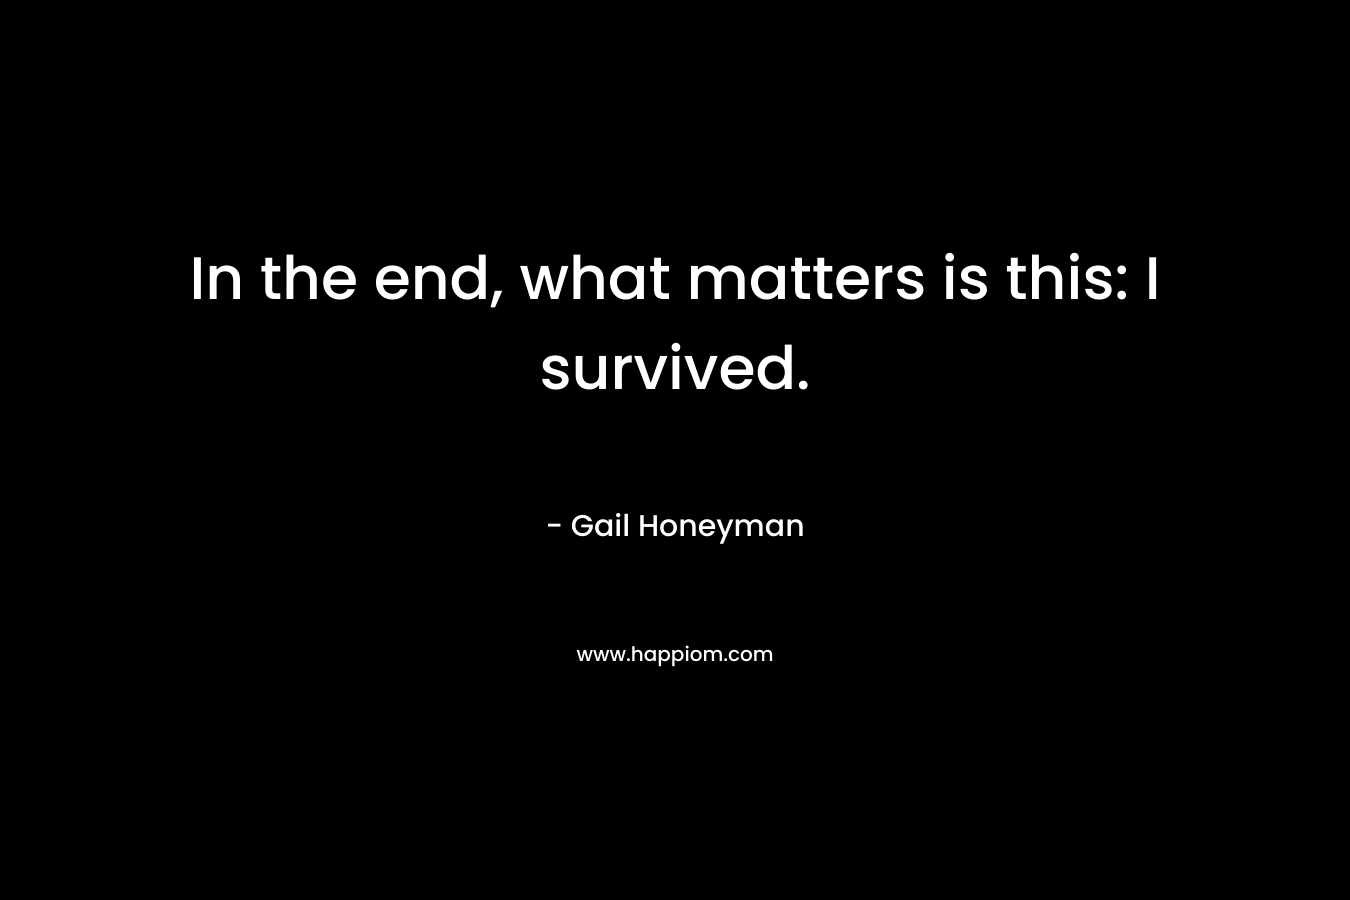 In the end, what matters is this: I survived. – Gail Honeyman